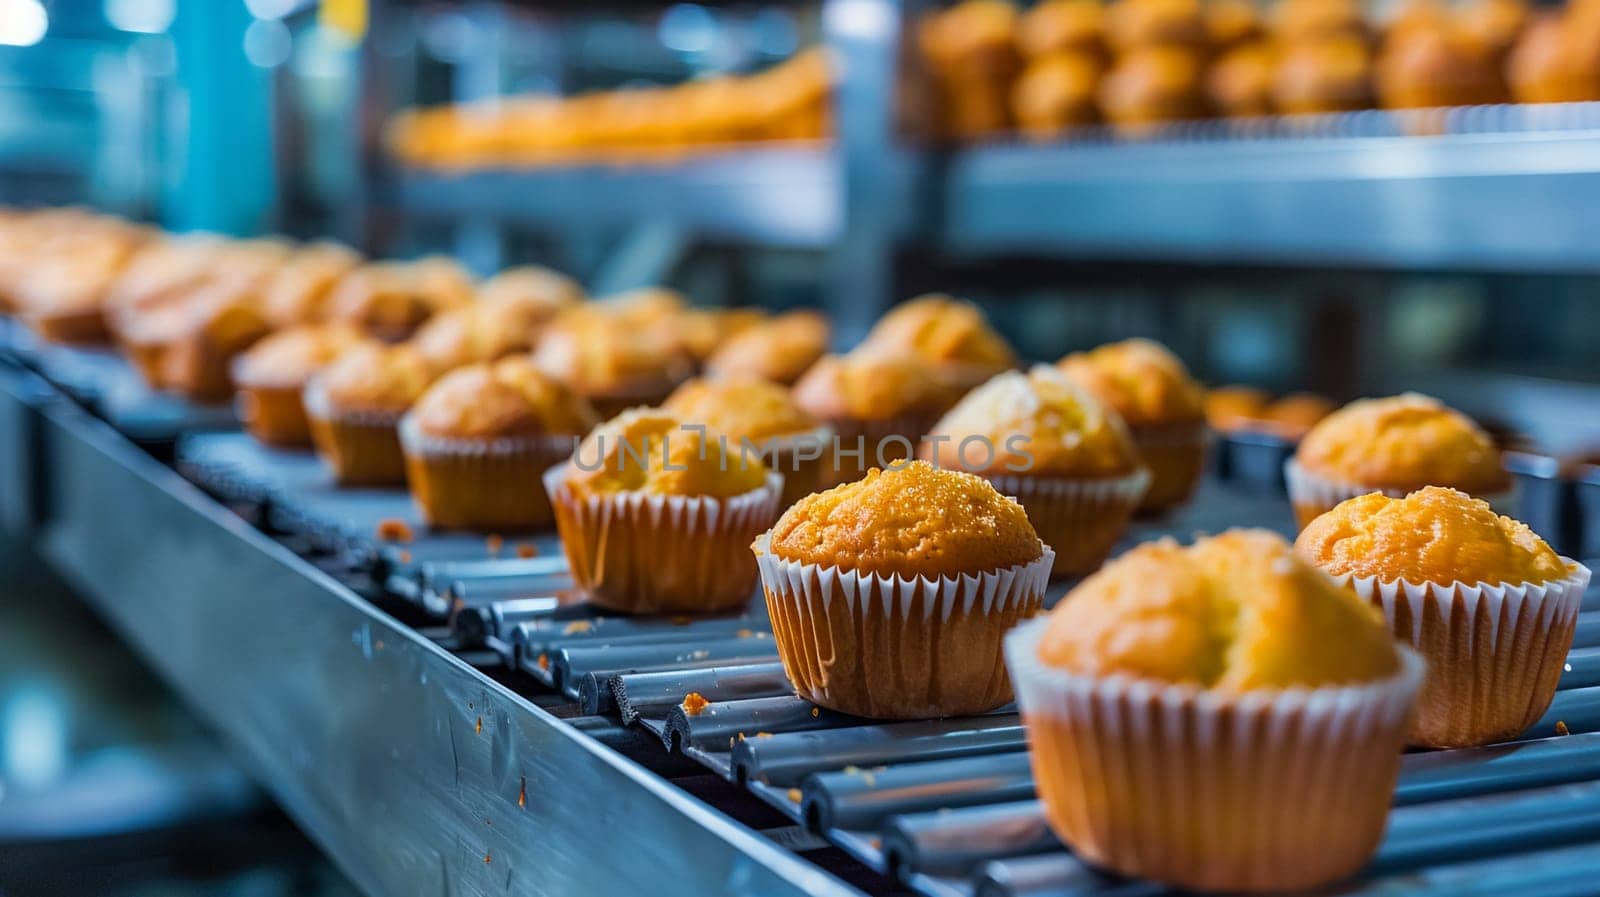 Close up of freshly baked muffins on conveyor in large scale bakery production. Manufacturing, food industry and automation concept captured in detail.